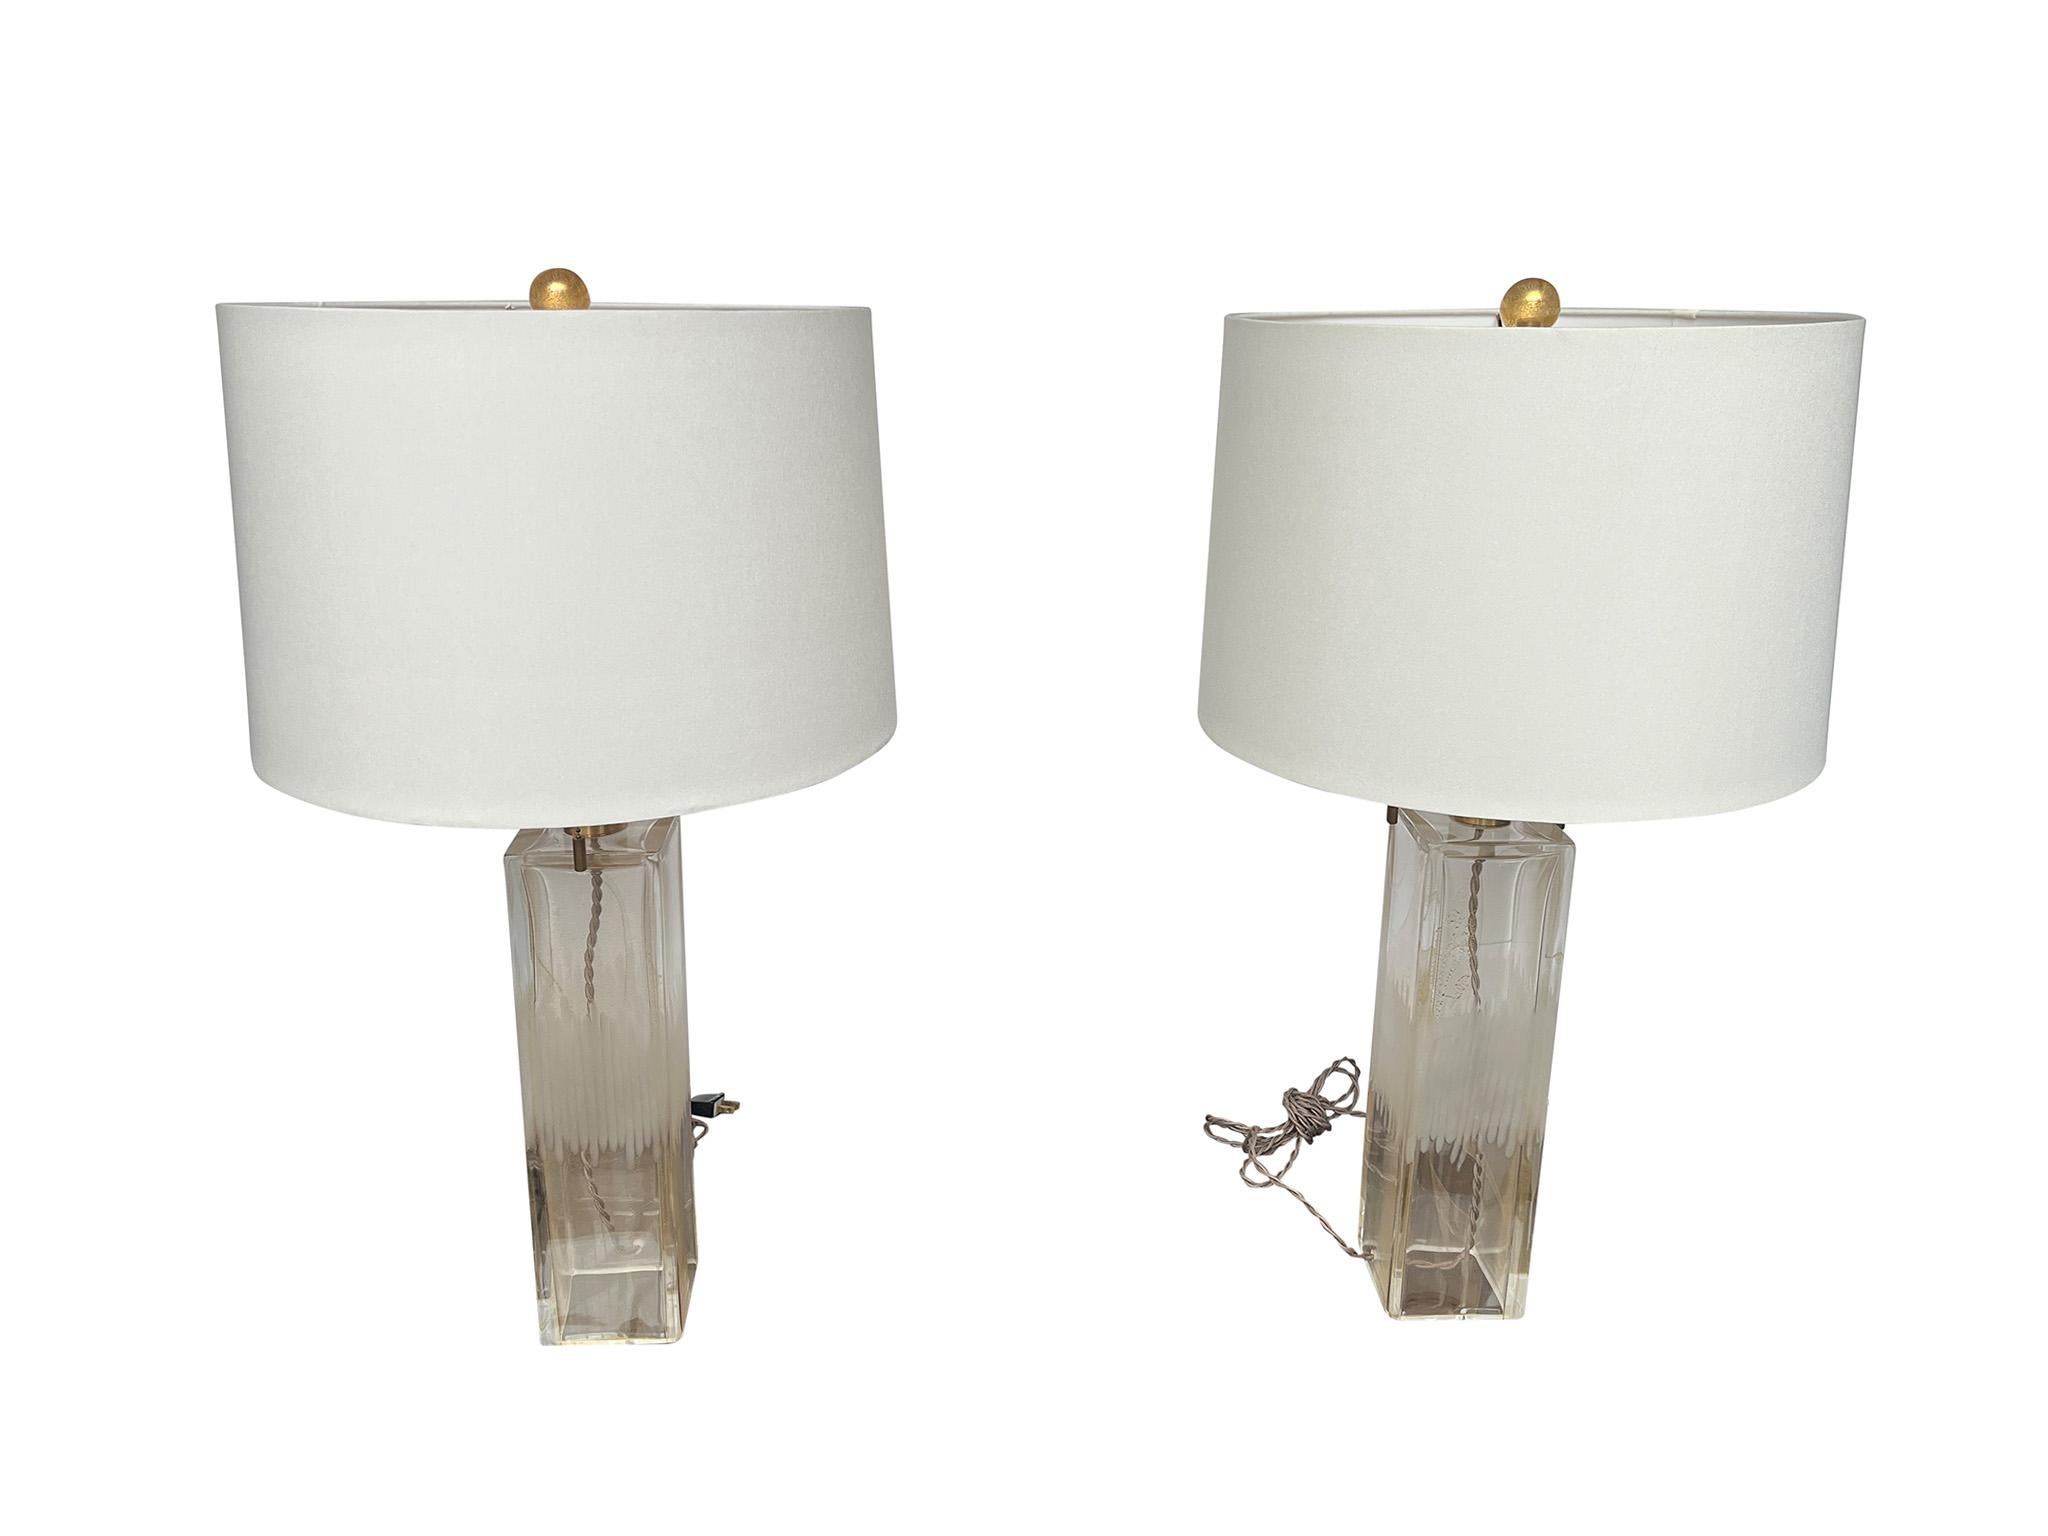 Luxurious pair of Aventurine glass table lamps by Donghia. Characterized by the delicate gold flecking that creates the aventurine effect and etched detail on the mid-body of the base, these lamps make a wonderful addition to any space. Signed